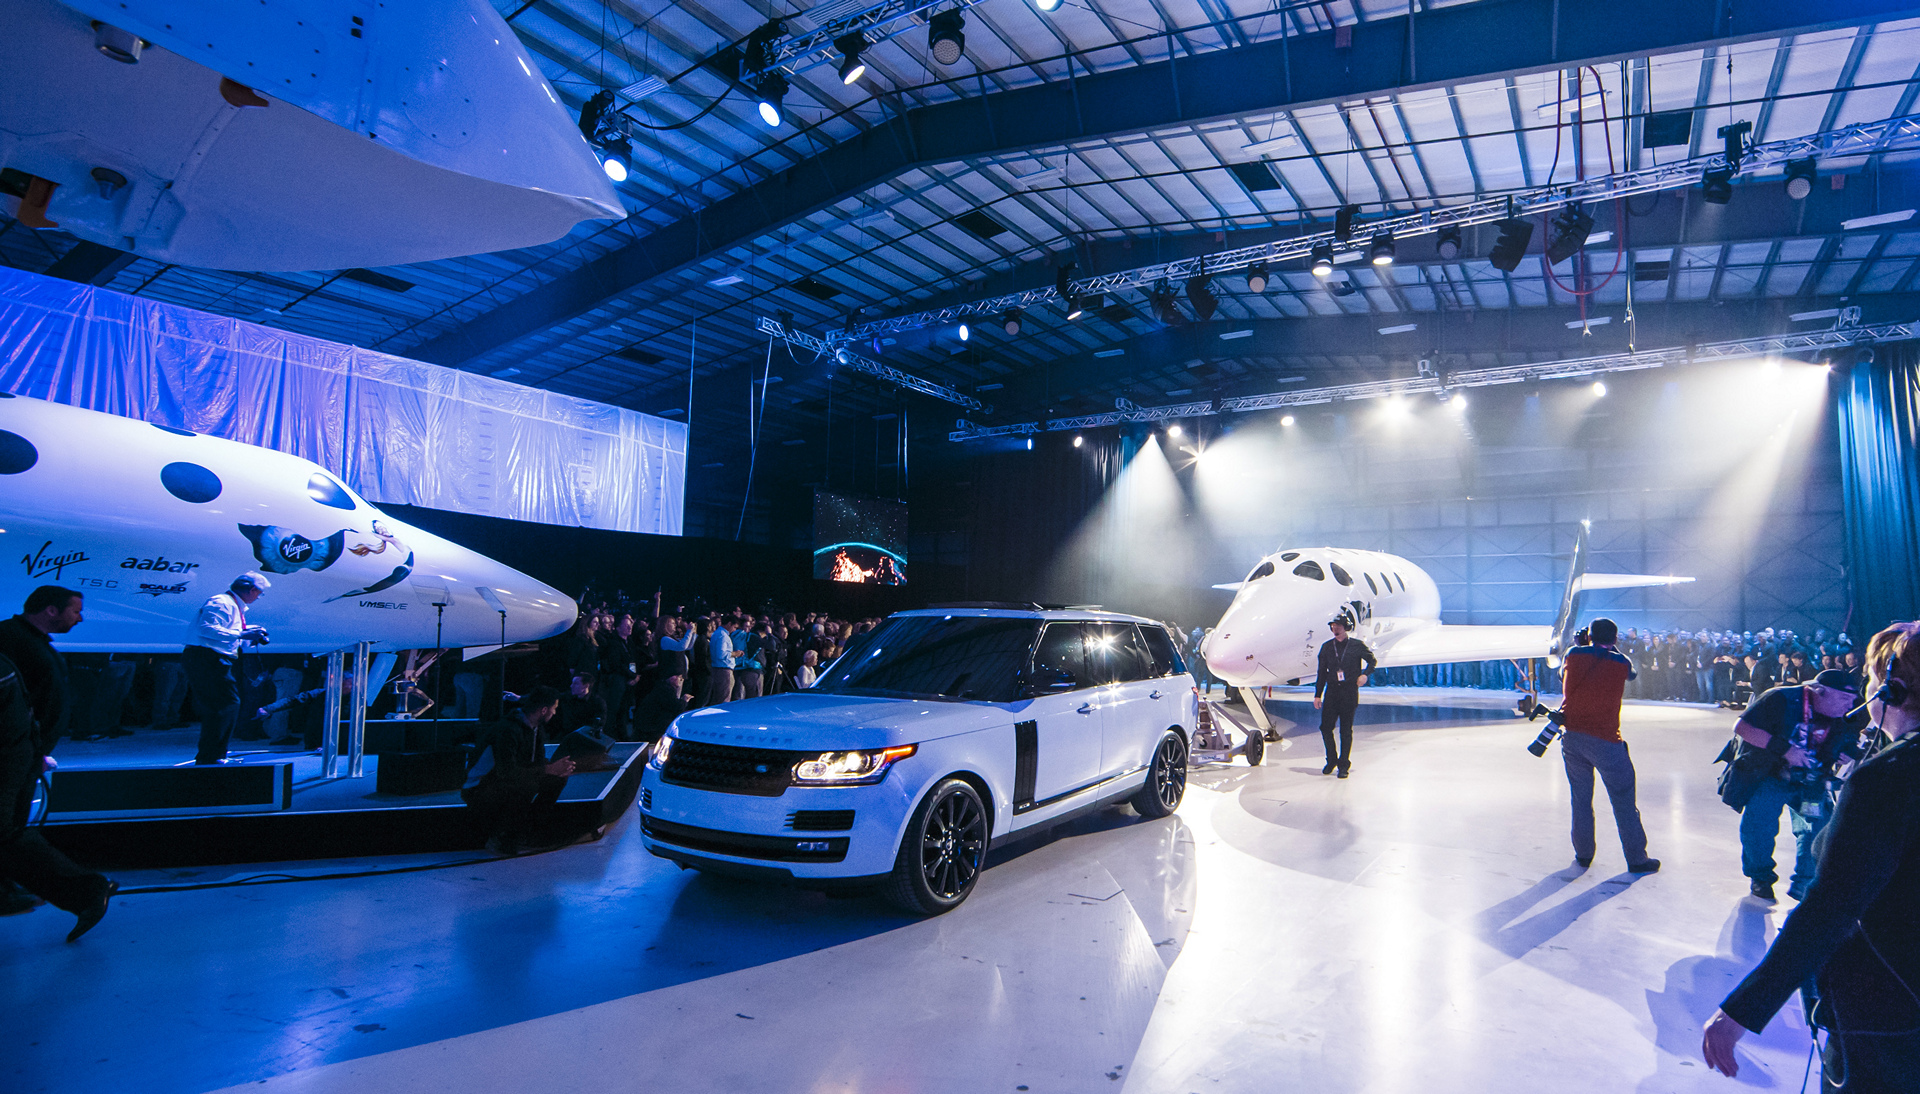 The Range Rover Autobiography towing in VSS Unity, at a special reveal and naming ceremony at Virgin Galactic's Mojave Air and Space Port base in California © Tata Group